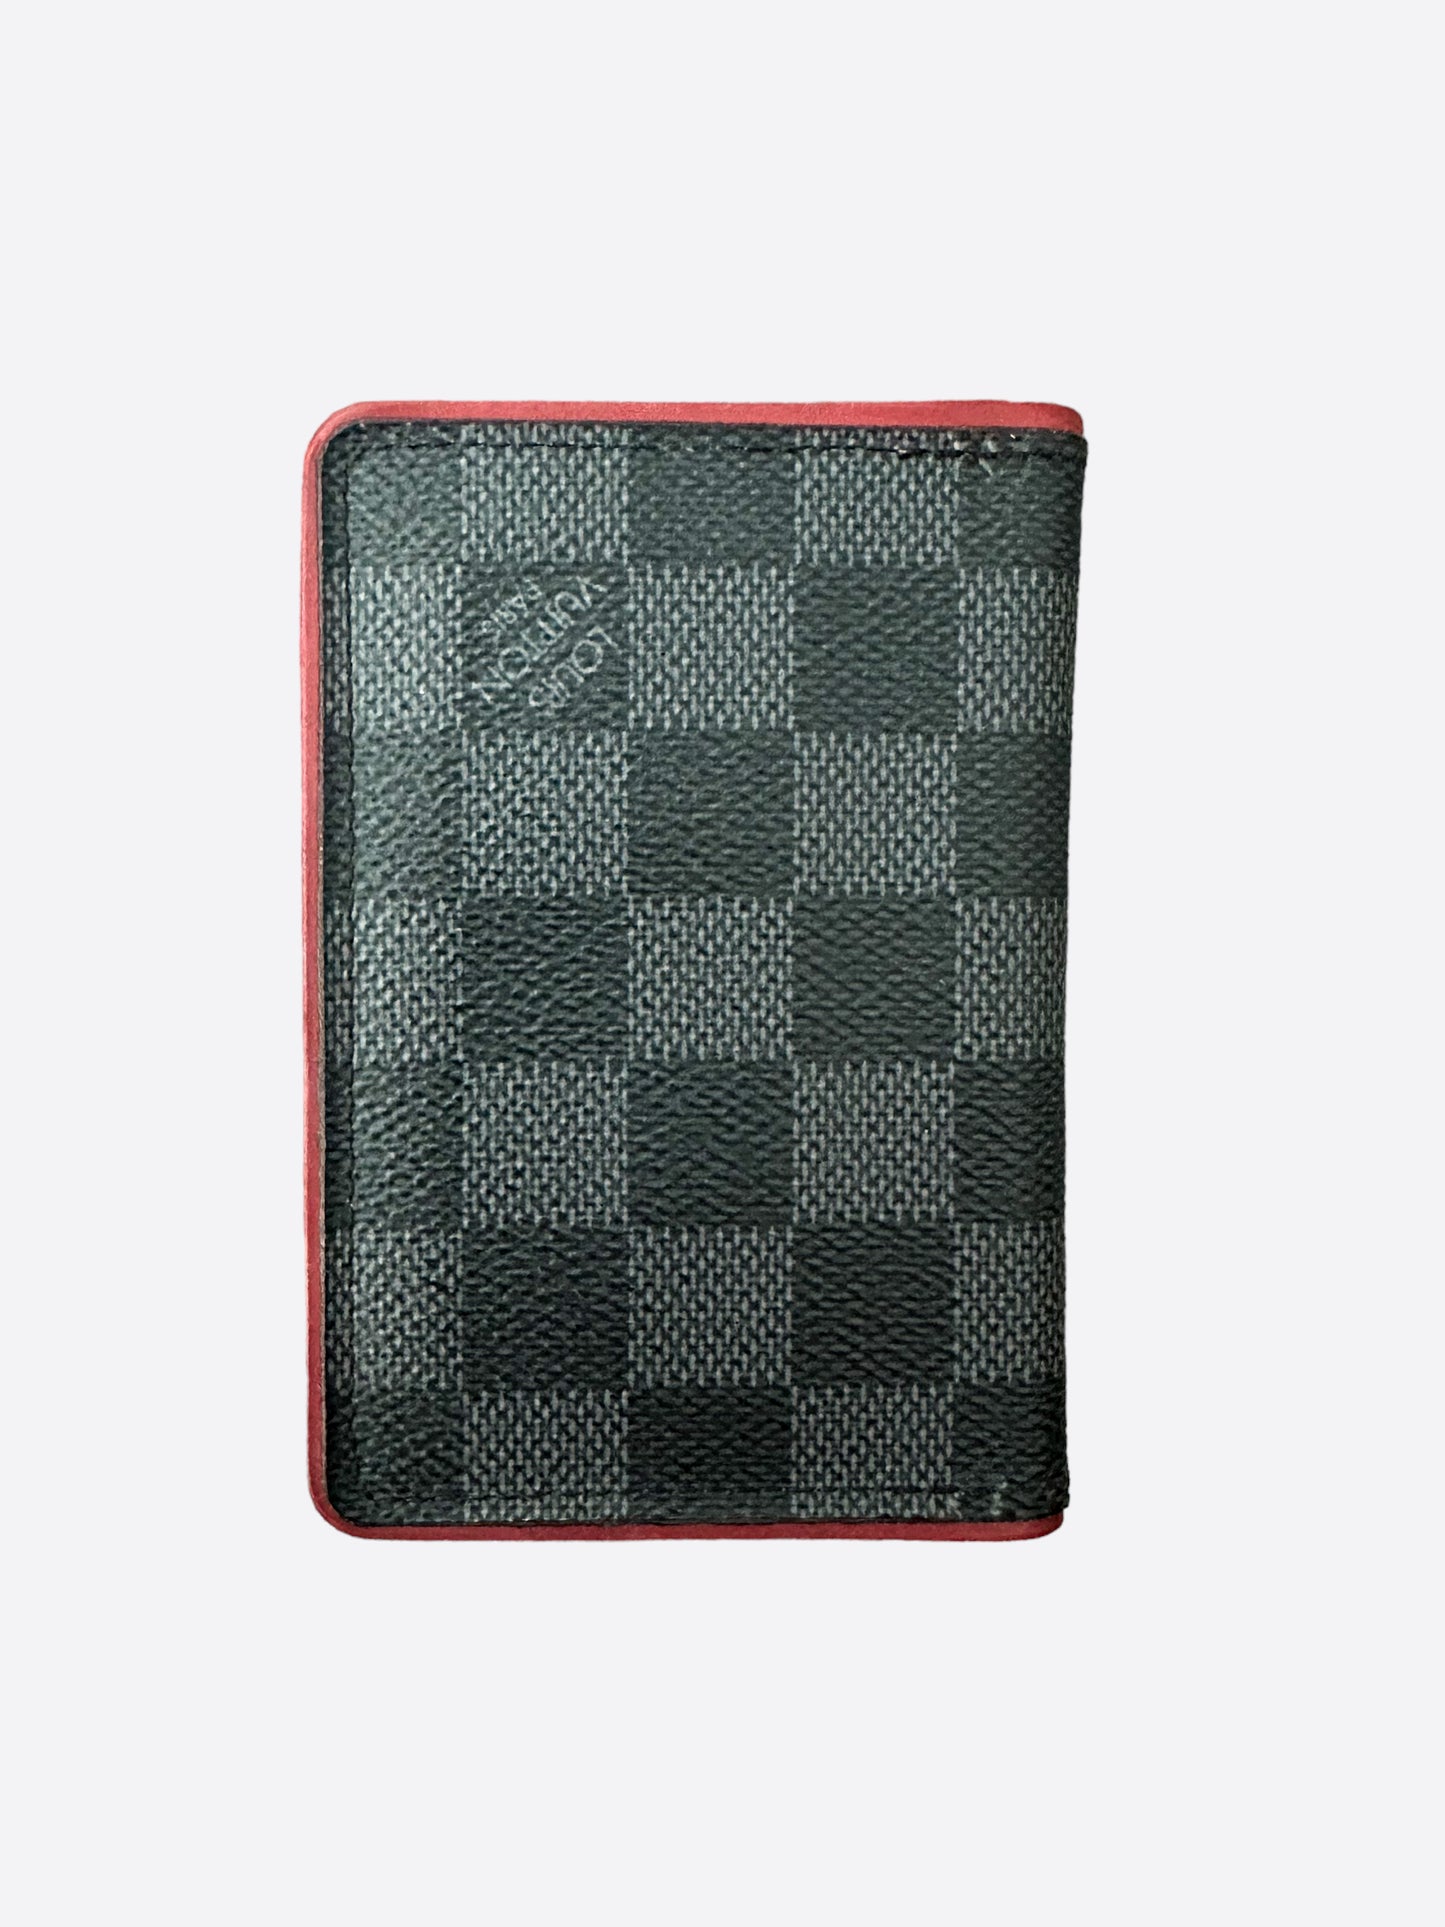 Louis Vuitton Pocket Organizer Damier Graphite Map Black Lining in Coated  CanvasLouis Vuitton Pocket Organizer Damier Graphite Map Black Lining in  Coated Canvas - OFour